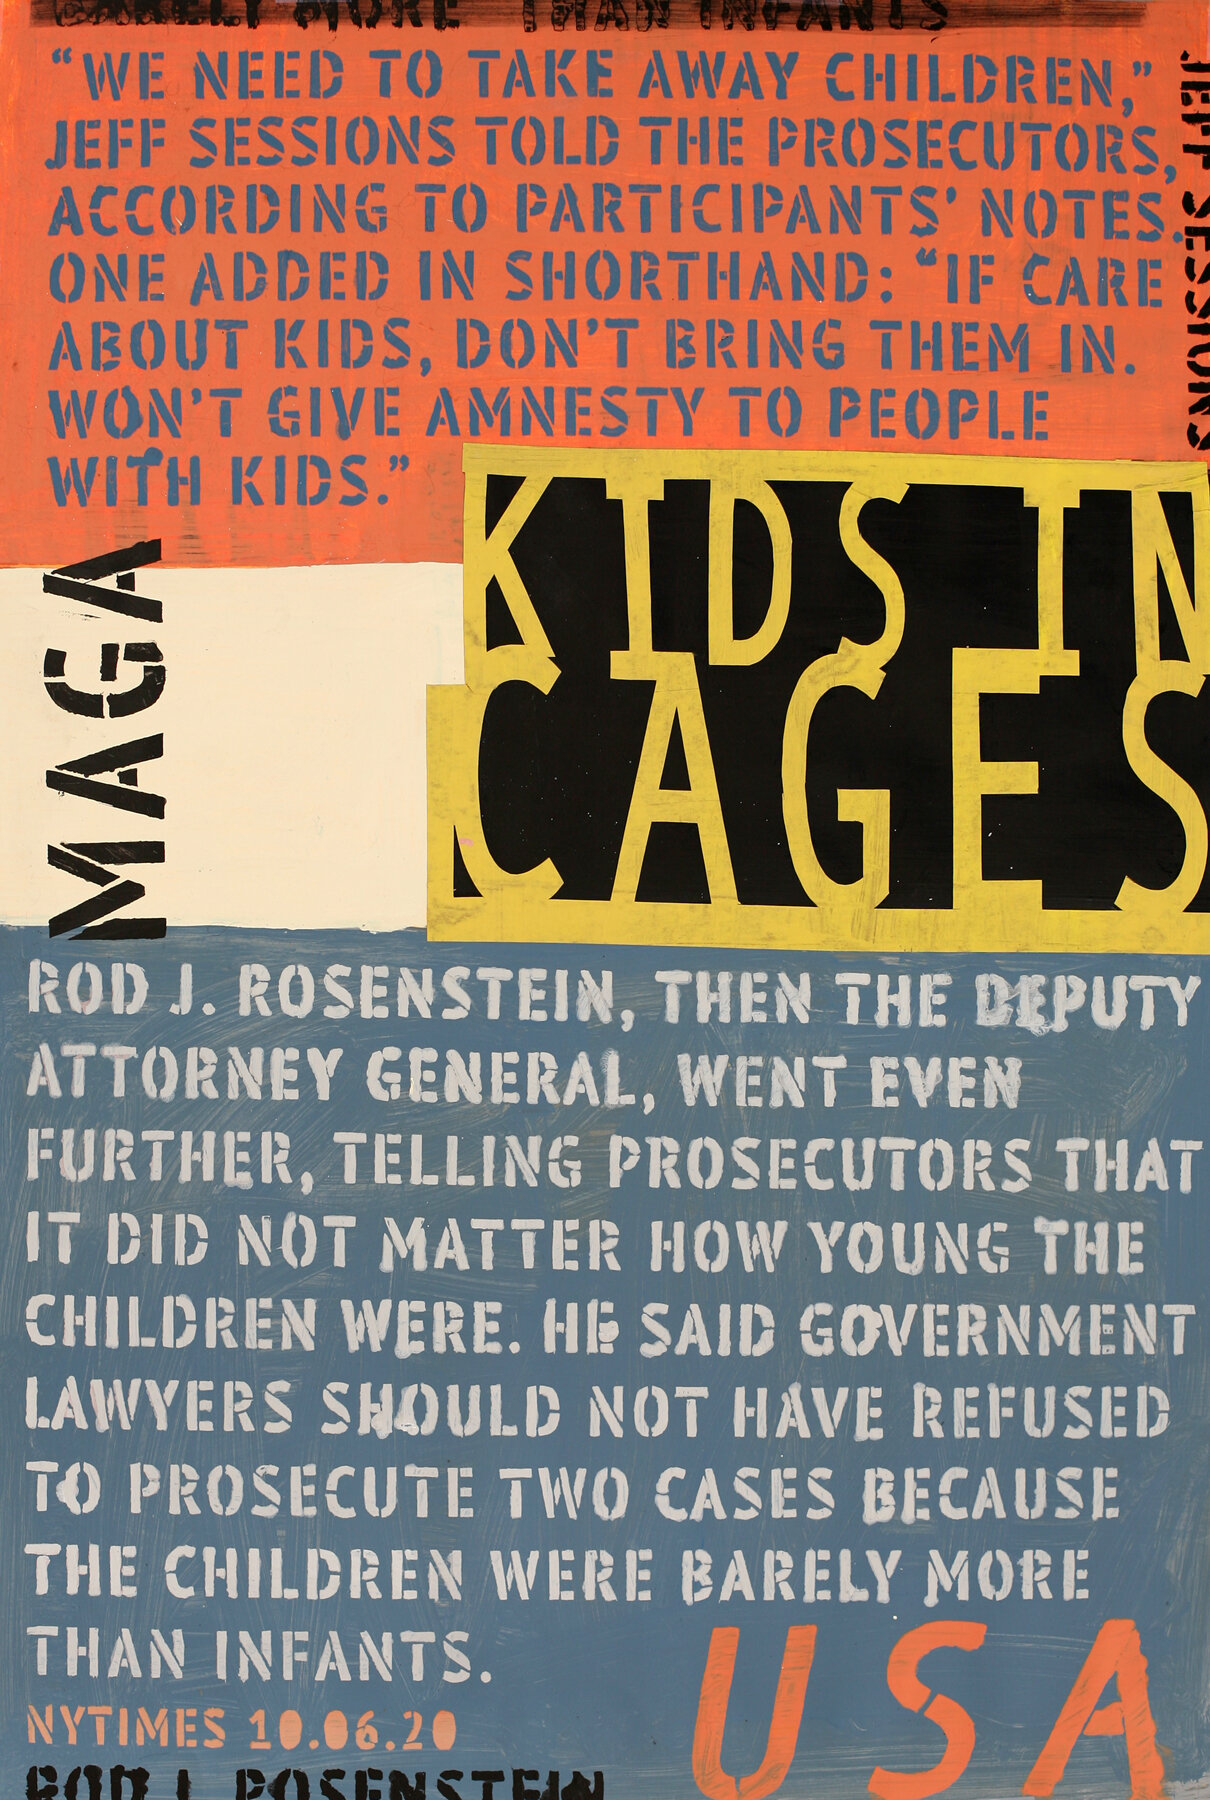 Kids-in-Cages 06